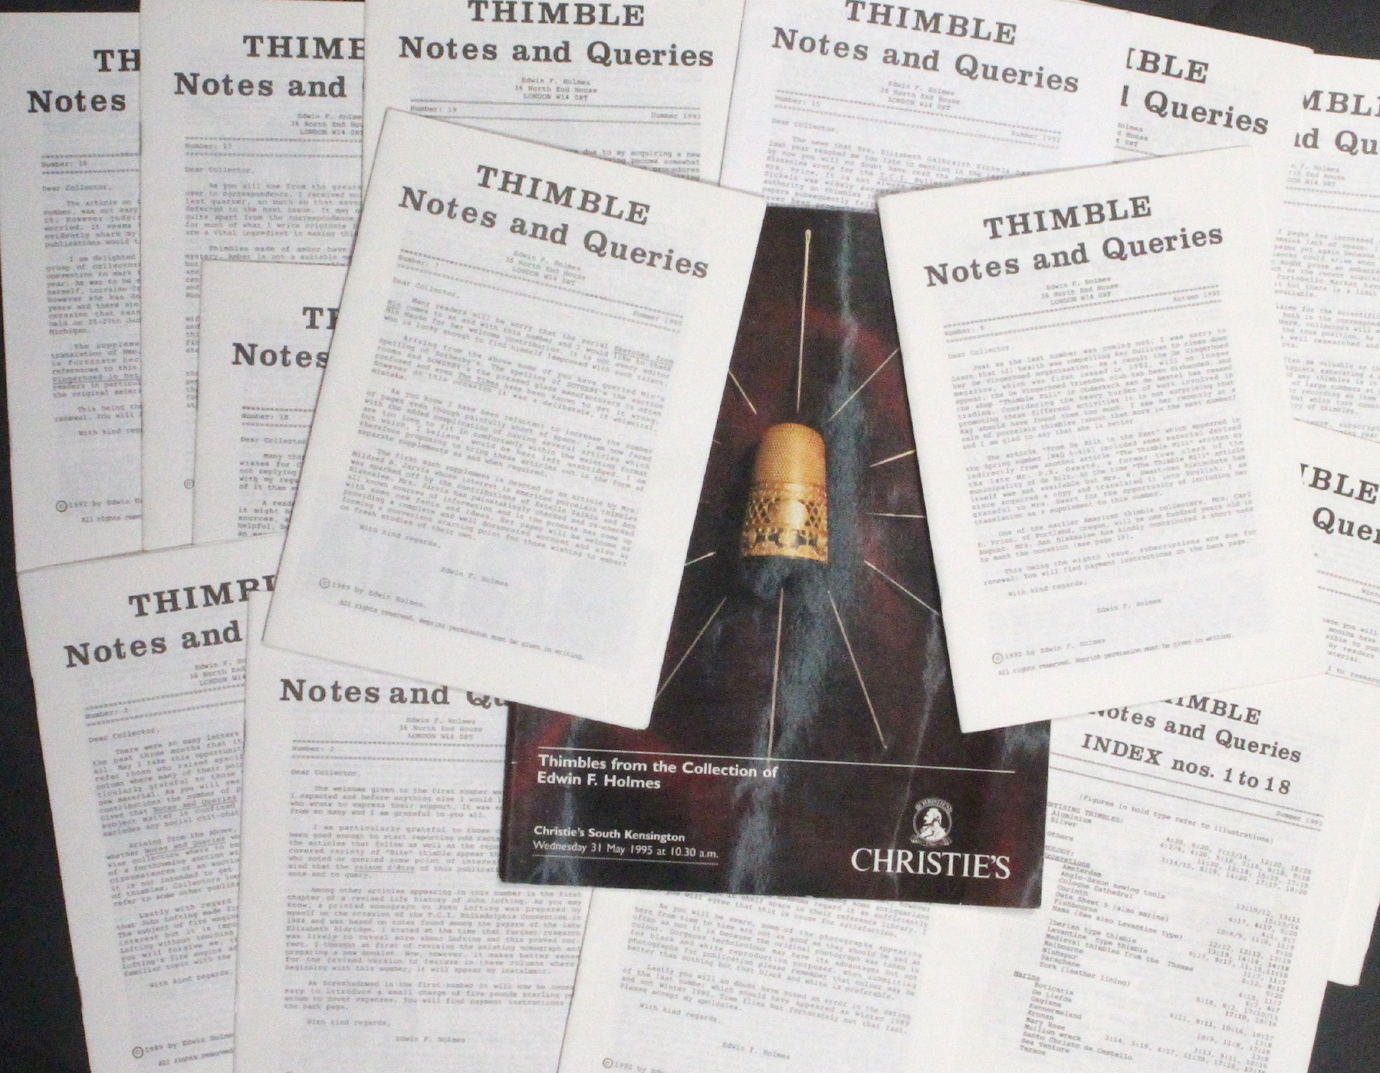 Edwin Holmes - Thimble Notes And Queries No. 2 Spring 1989 to No. 20 Autumn 1993 inclusive